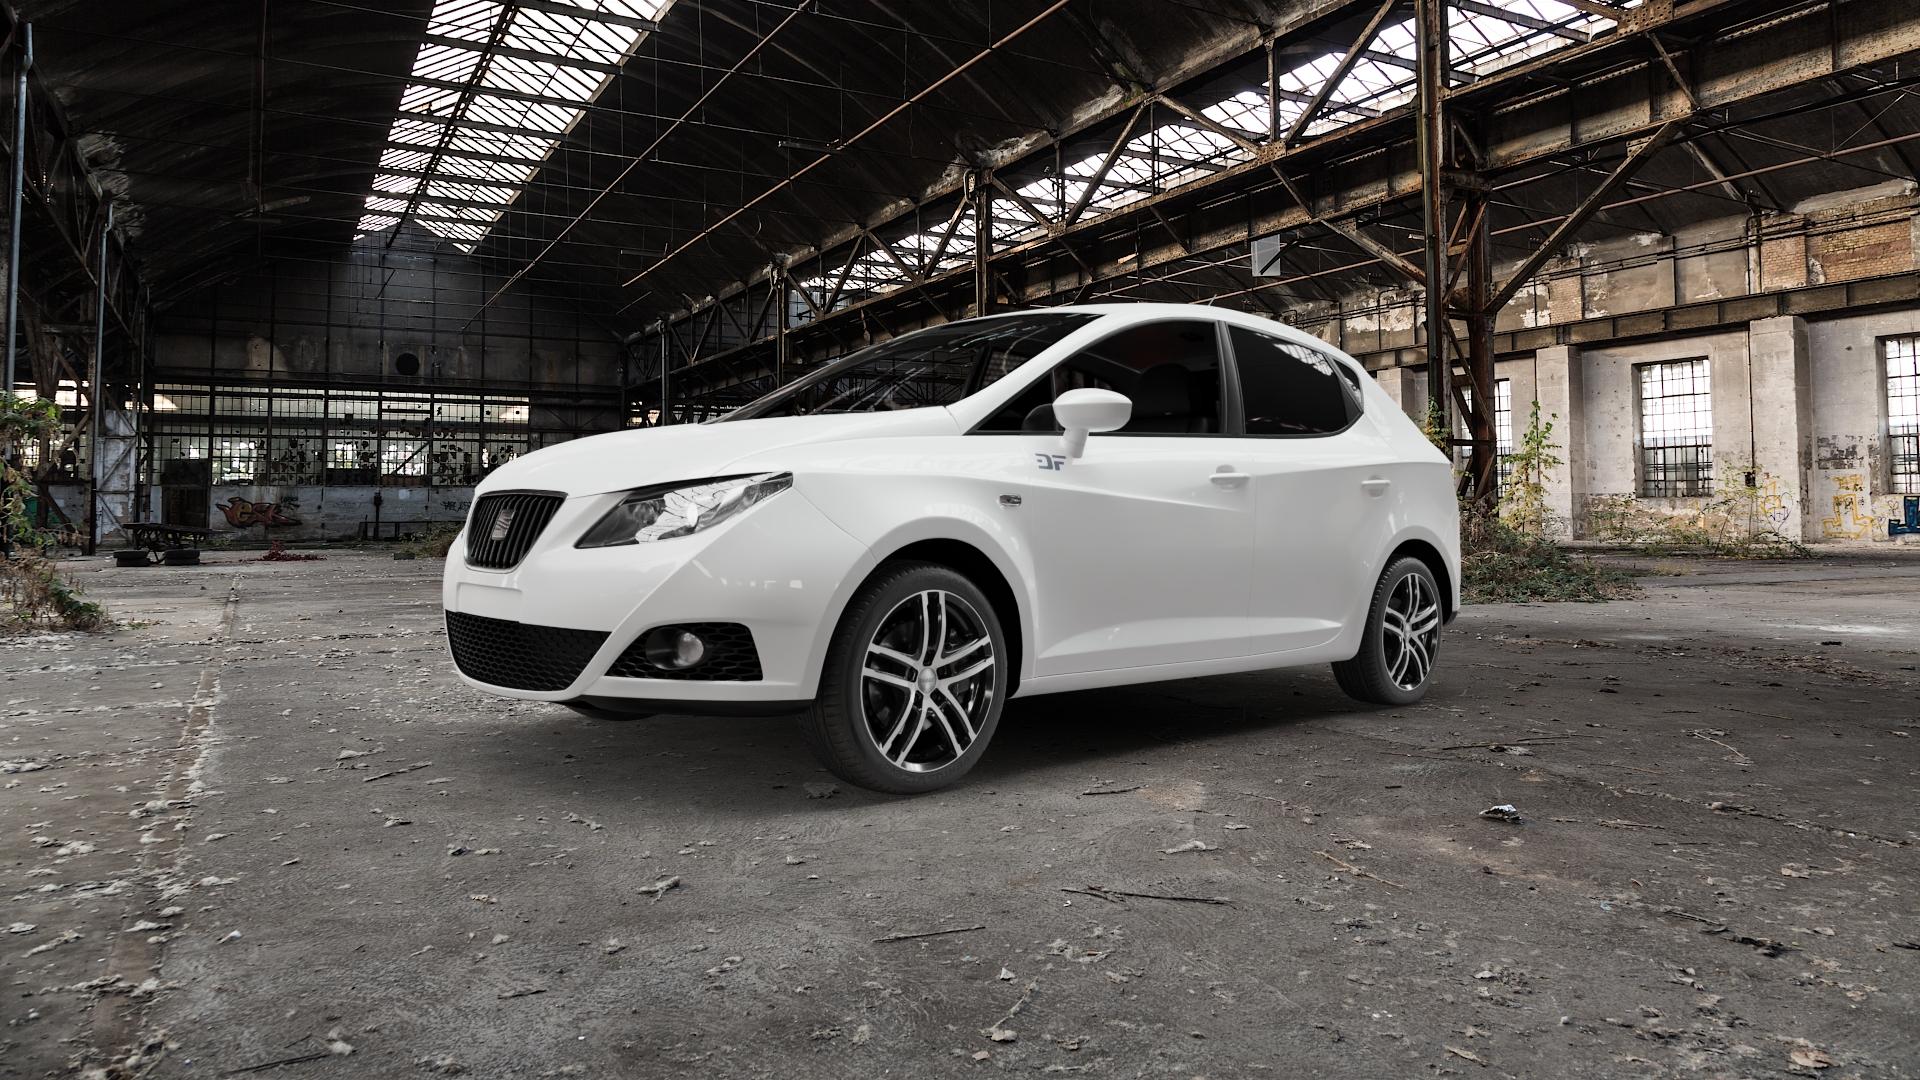 Seat Ibiza IV Type 6J 1,9l TDI 77kW (105 hp) Wheels and Tyre Packages